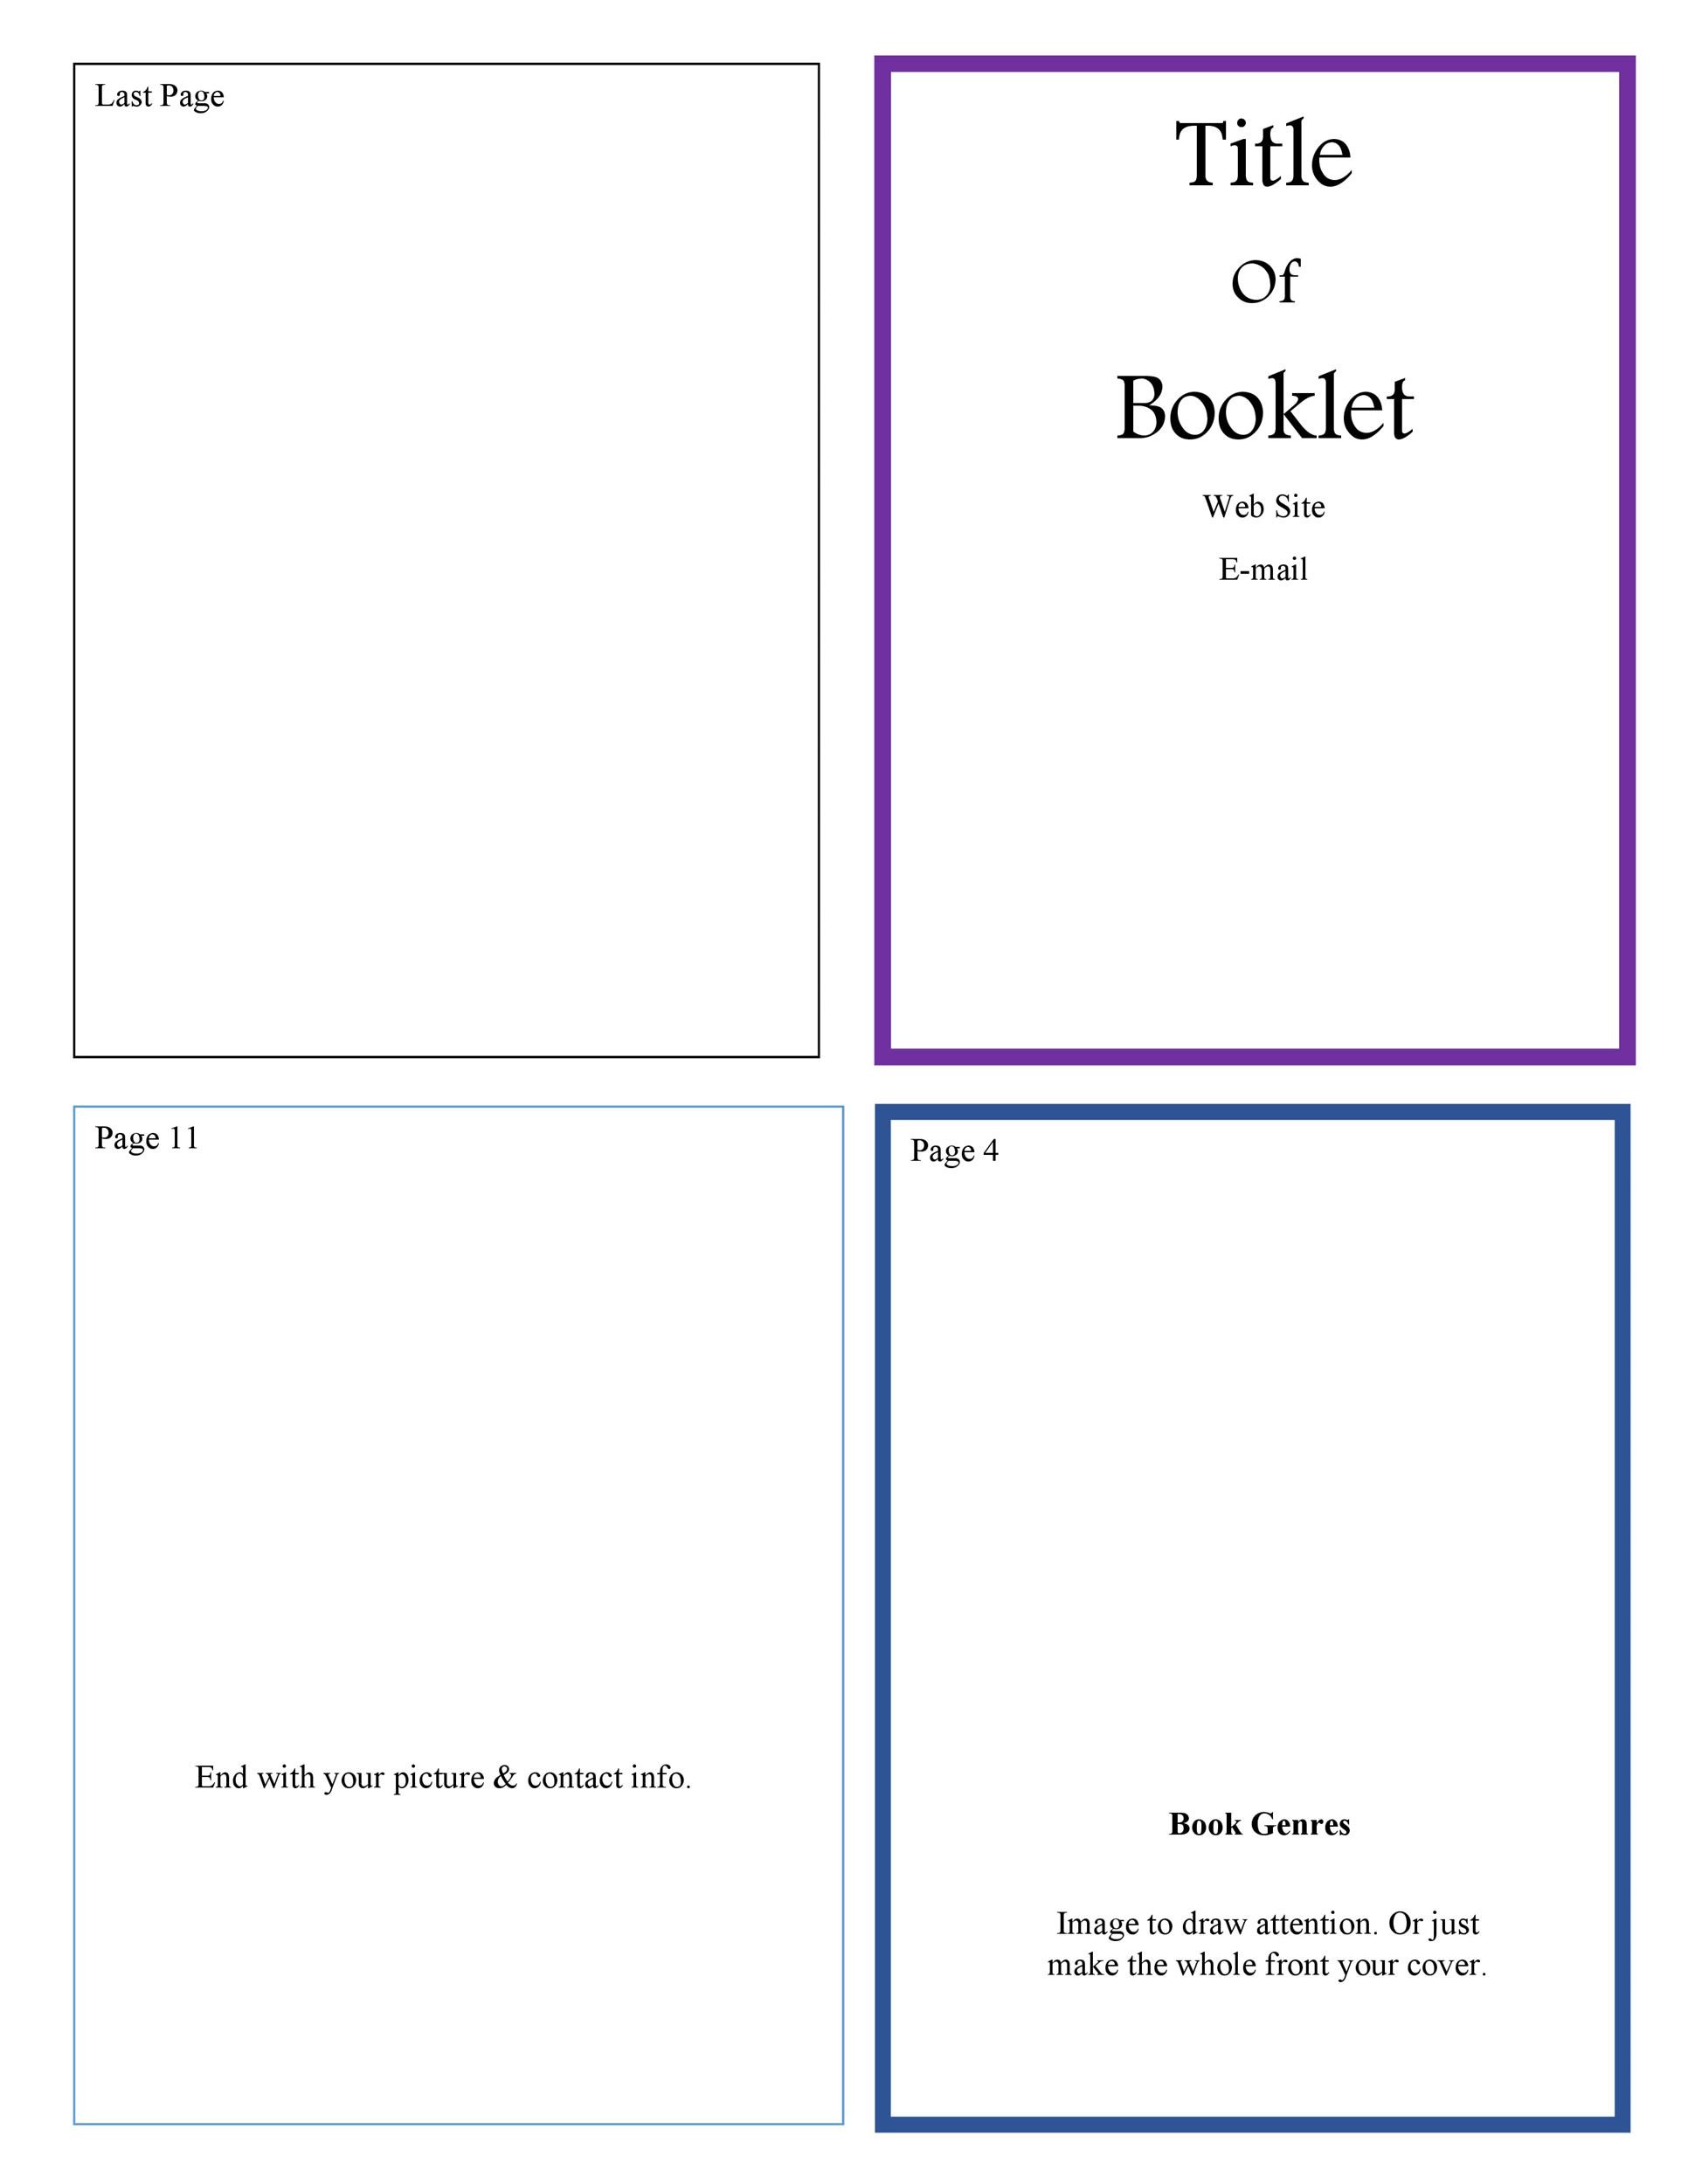 49 Free Booklet Templates Designs (MS Word) ᐅ TemplateLab